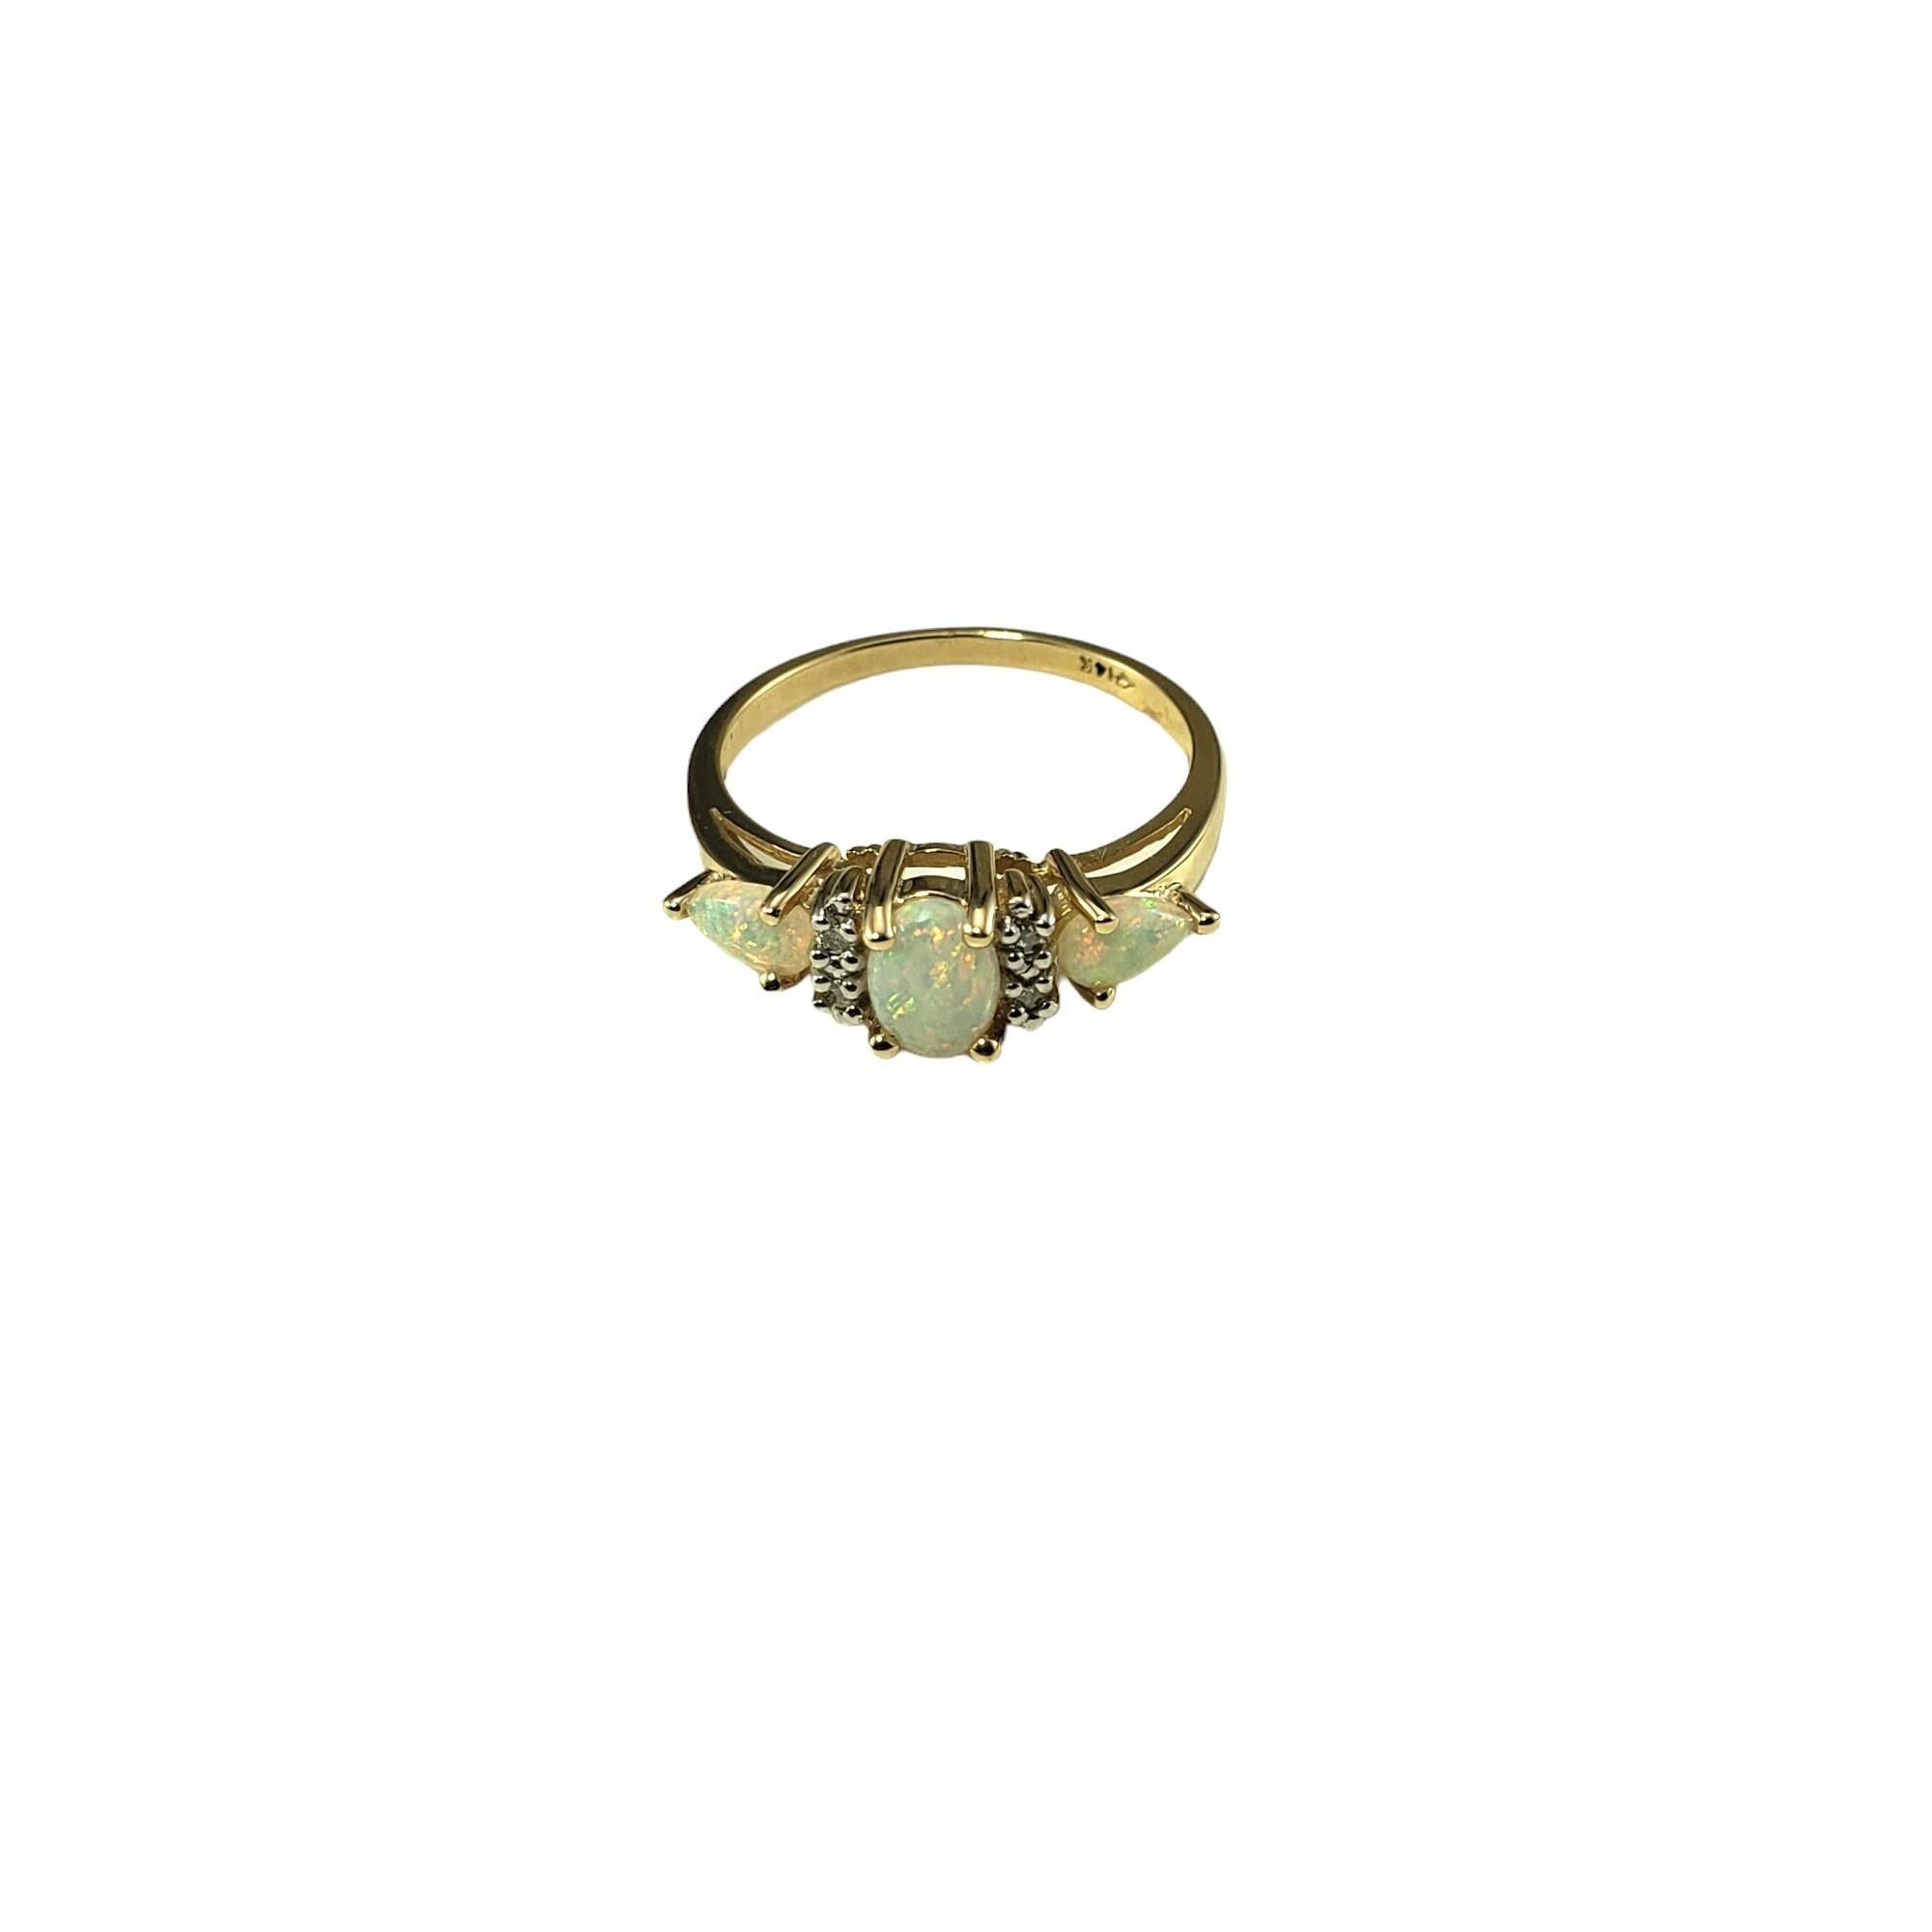 Vintage 14K Yellow Gold Opal and Diamond Ring Size 6-6.25-

This lovely ring features three opal gemstones and four round brilliant cut diamonds set in classic 14K yellow gold.  Width: 6 mm.  Shank: 1.5 mm.

Approximate total diamond weight: .04